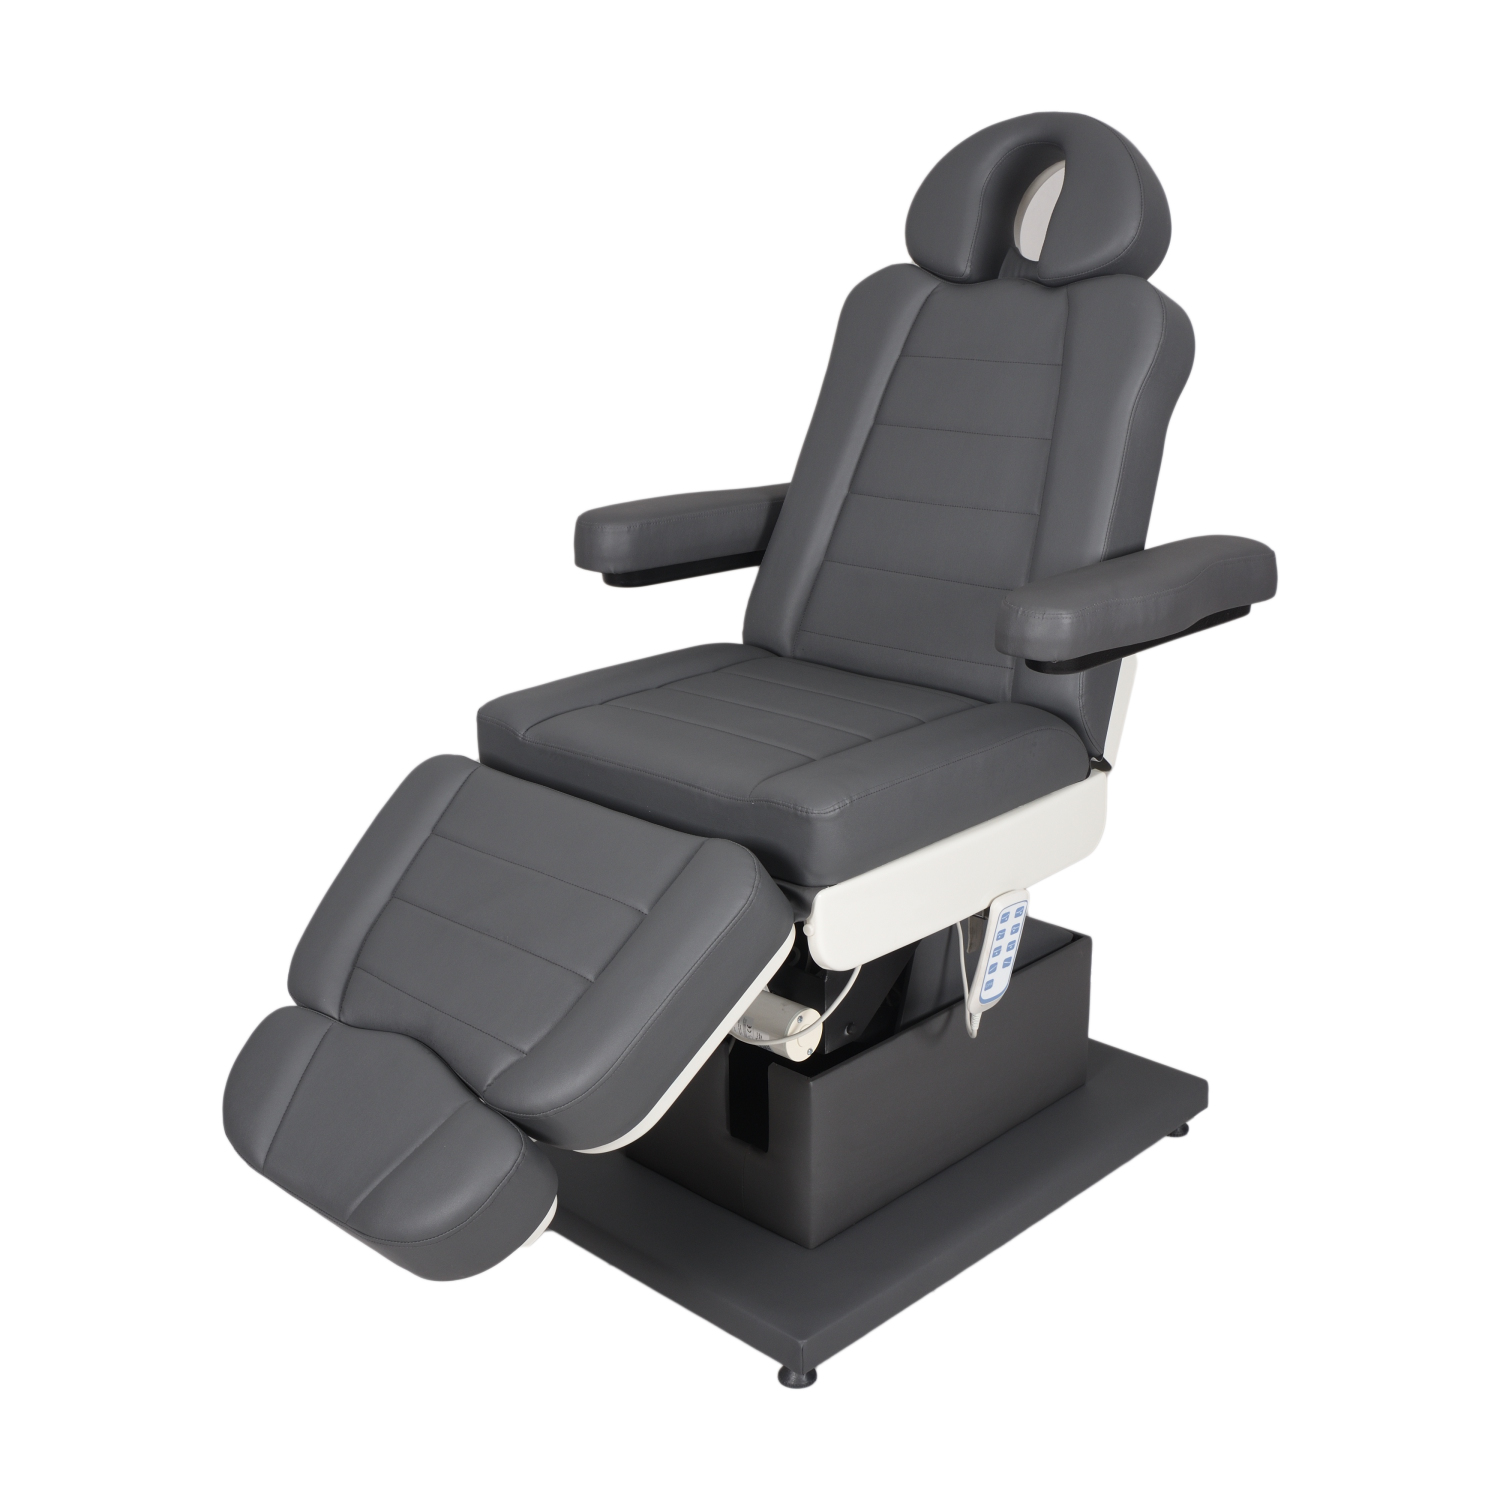 COMFORT VIP Hair Transplant and Medical Aesthetic Chair Gray